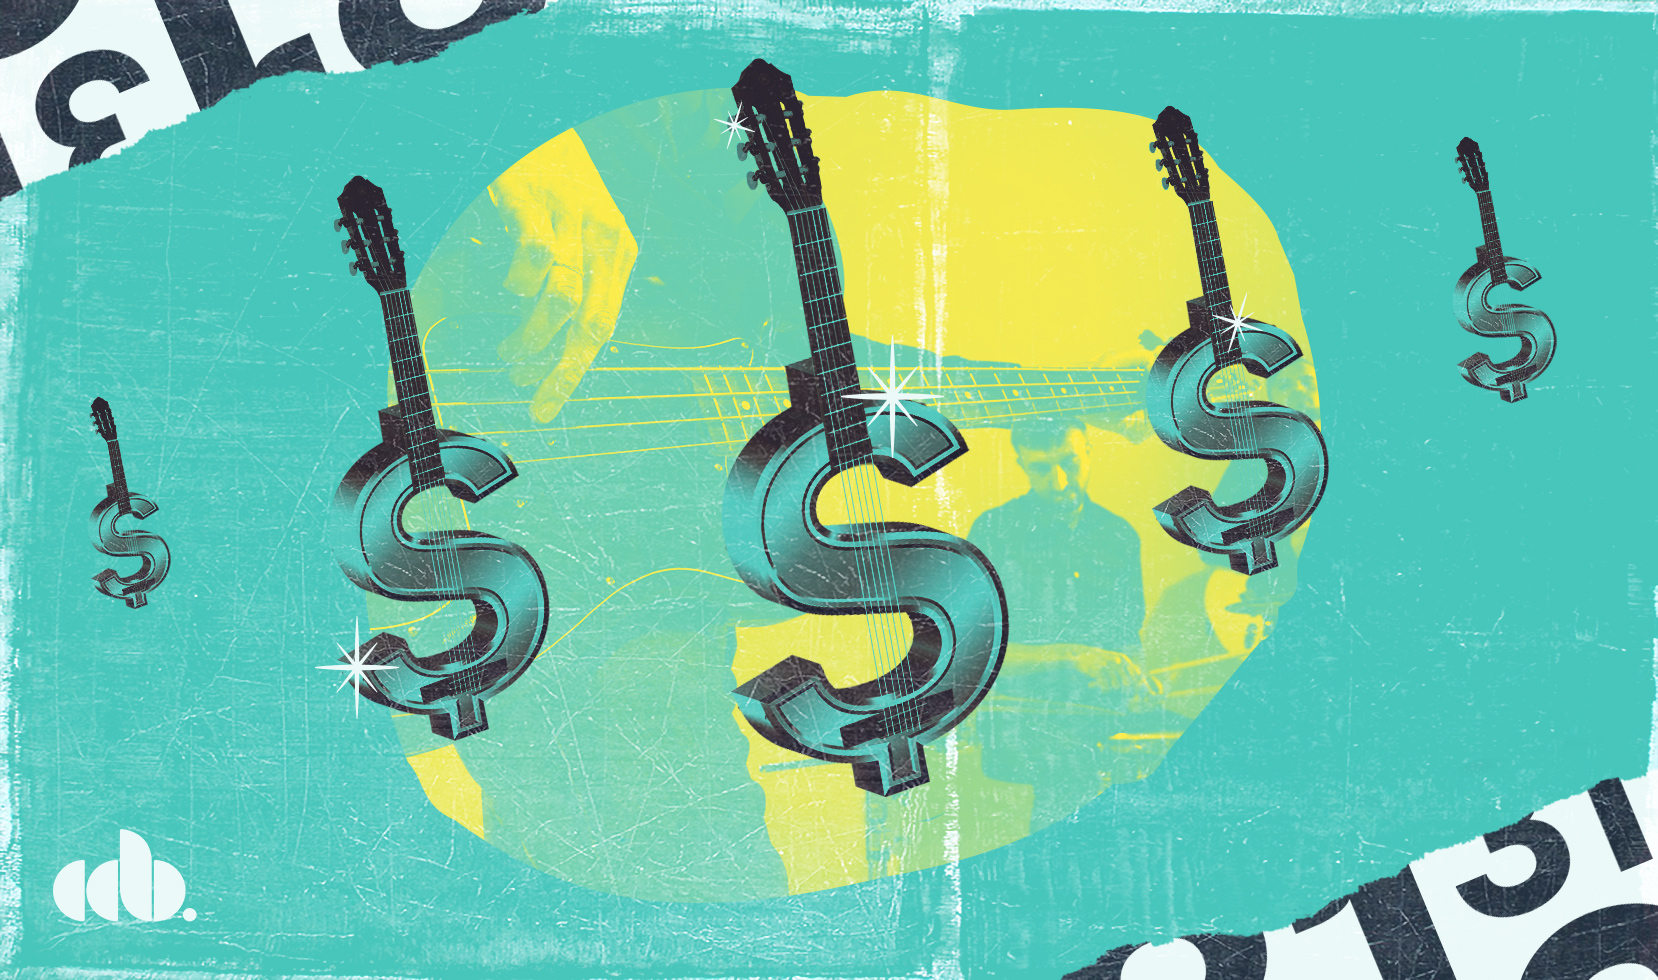 31 sources of music revenue and royalties